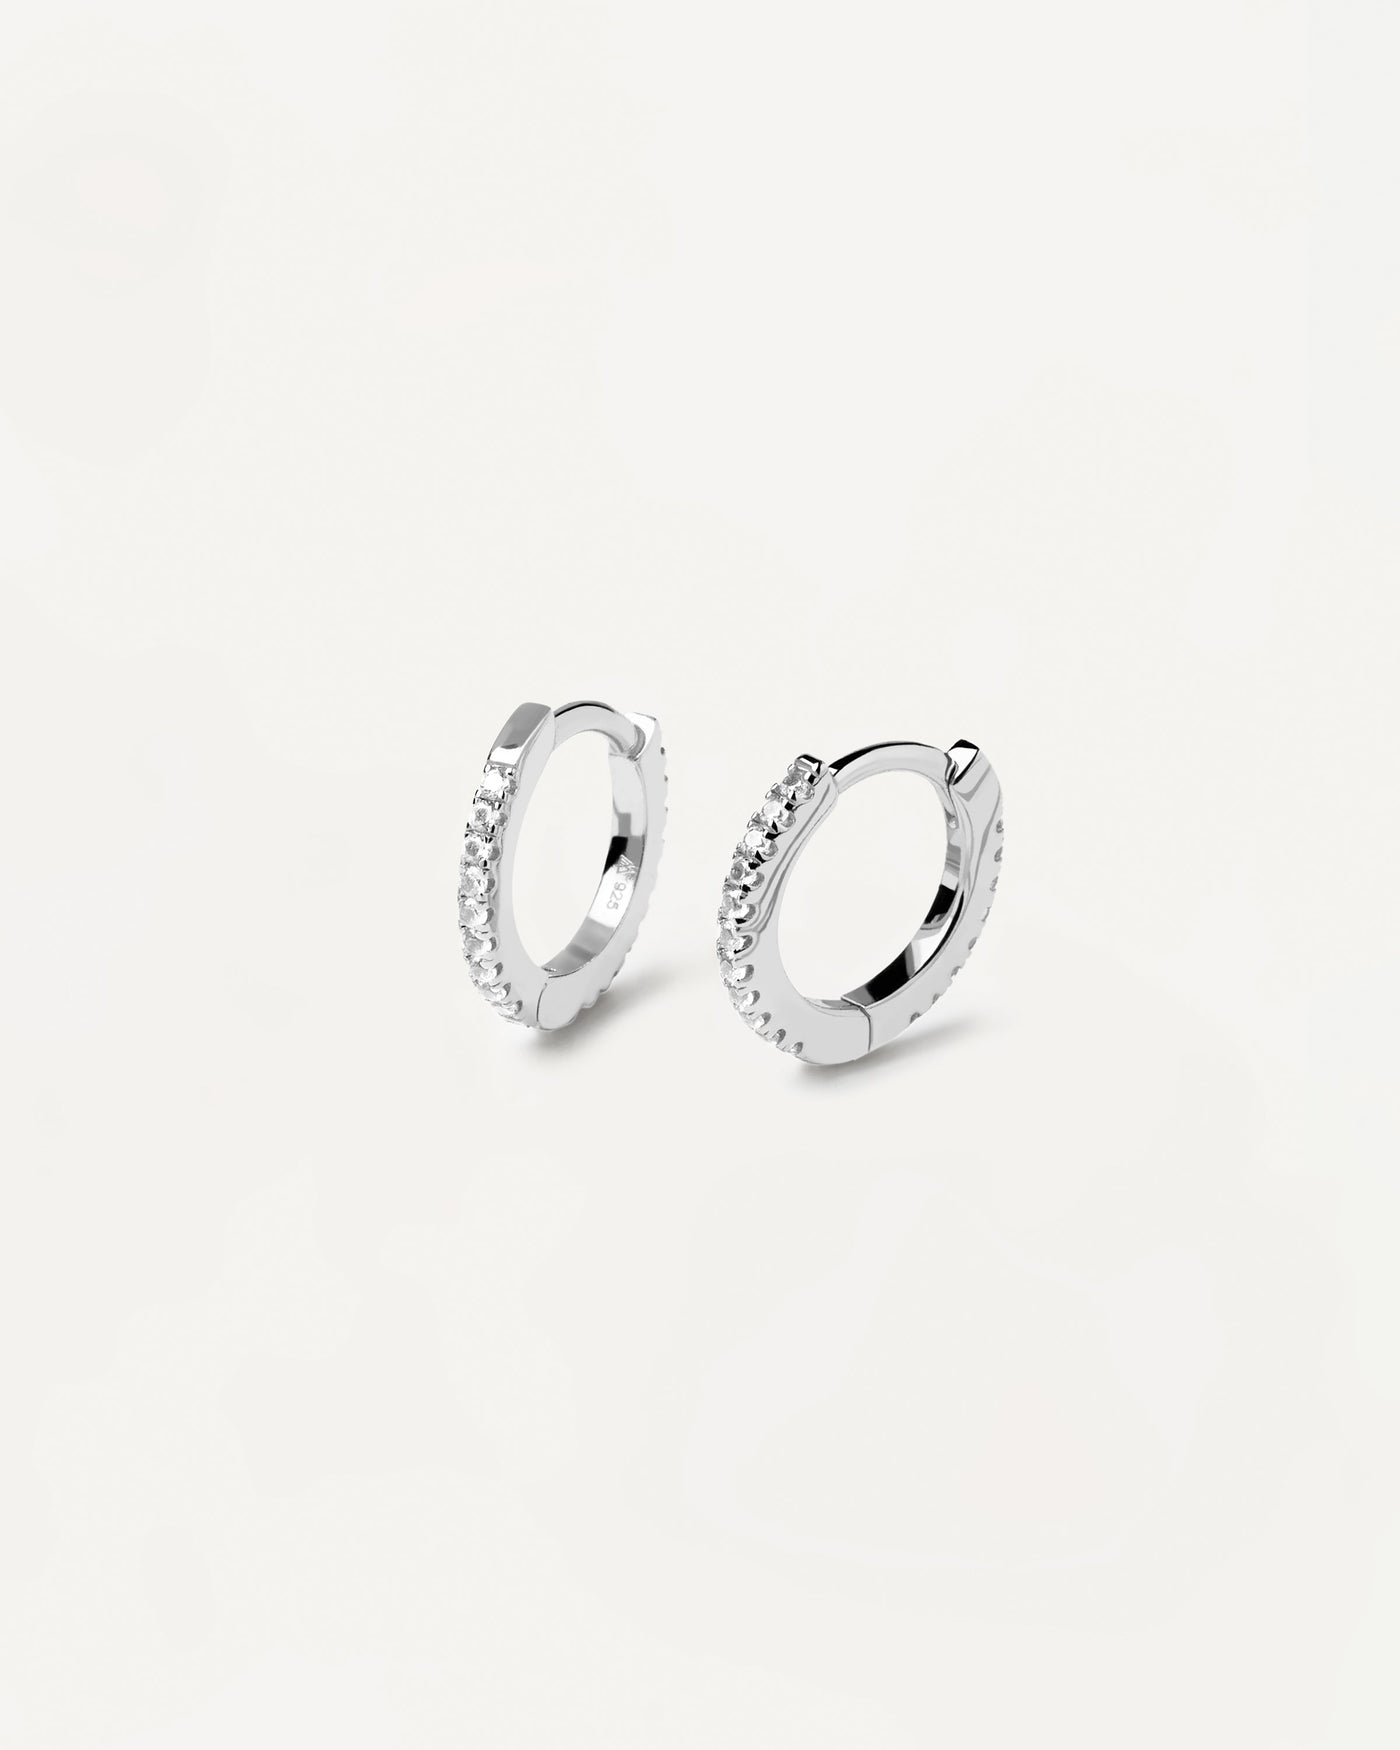 2023 Selection | White Mini Hoops Silver. Hoop latch-back earrings in sterling silver set with white zirconia. Get the latest arrival from PDPAOLA. Place your order safely and get this Best Seller. Free Shipping.